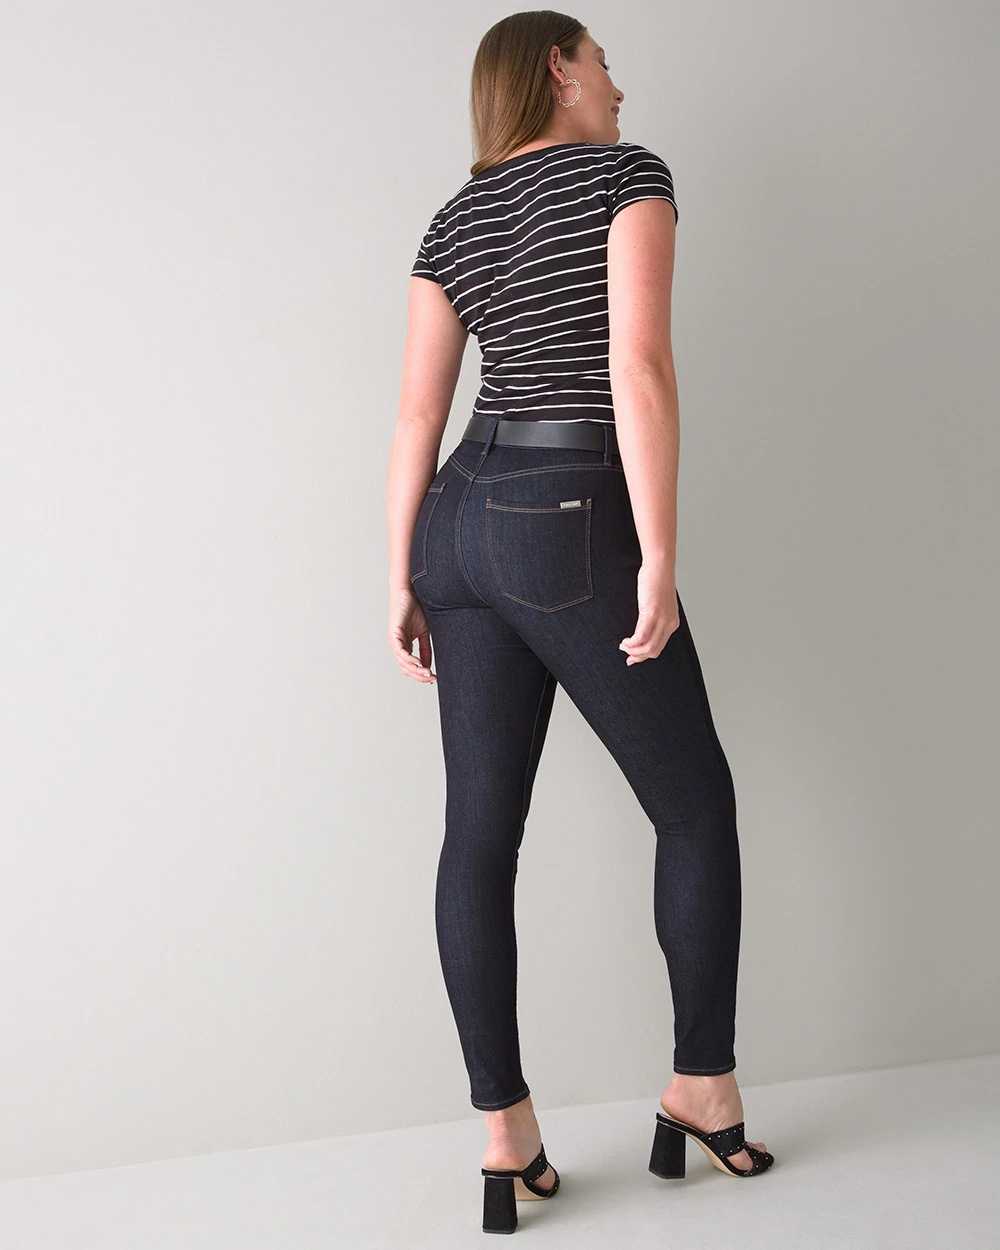 Curvy-Fit High-Rise Sculpt Skinny Jeans click to view larger image.